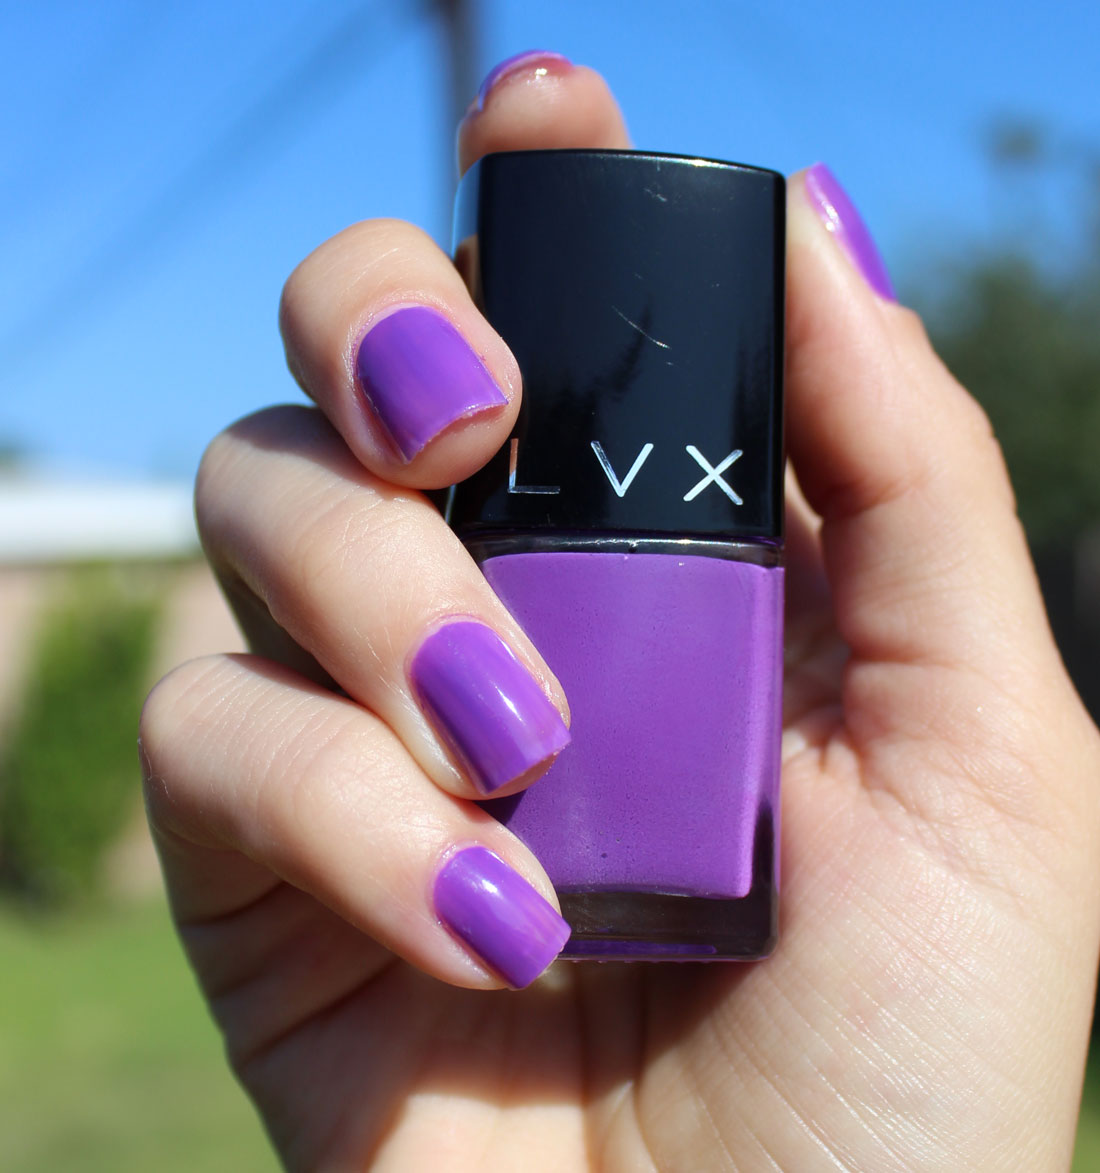 LVX Nail Lacquer Reine swatch by iliketotalkblog